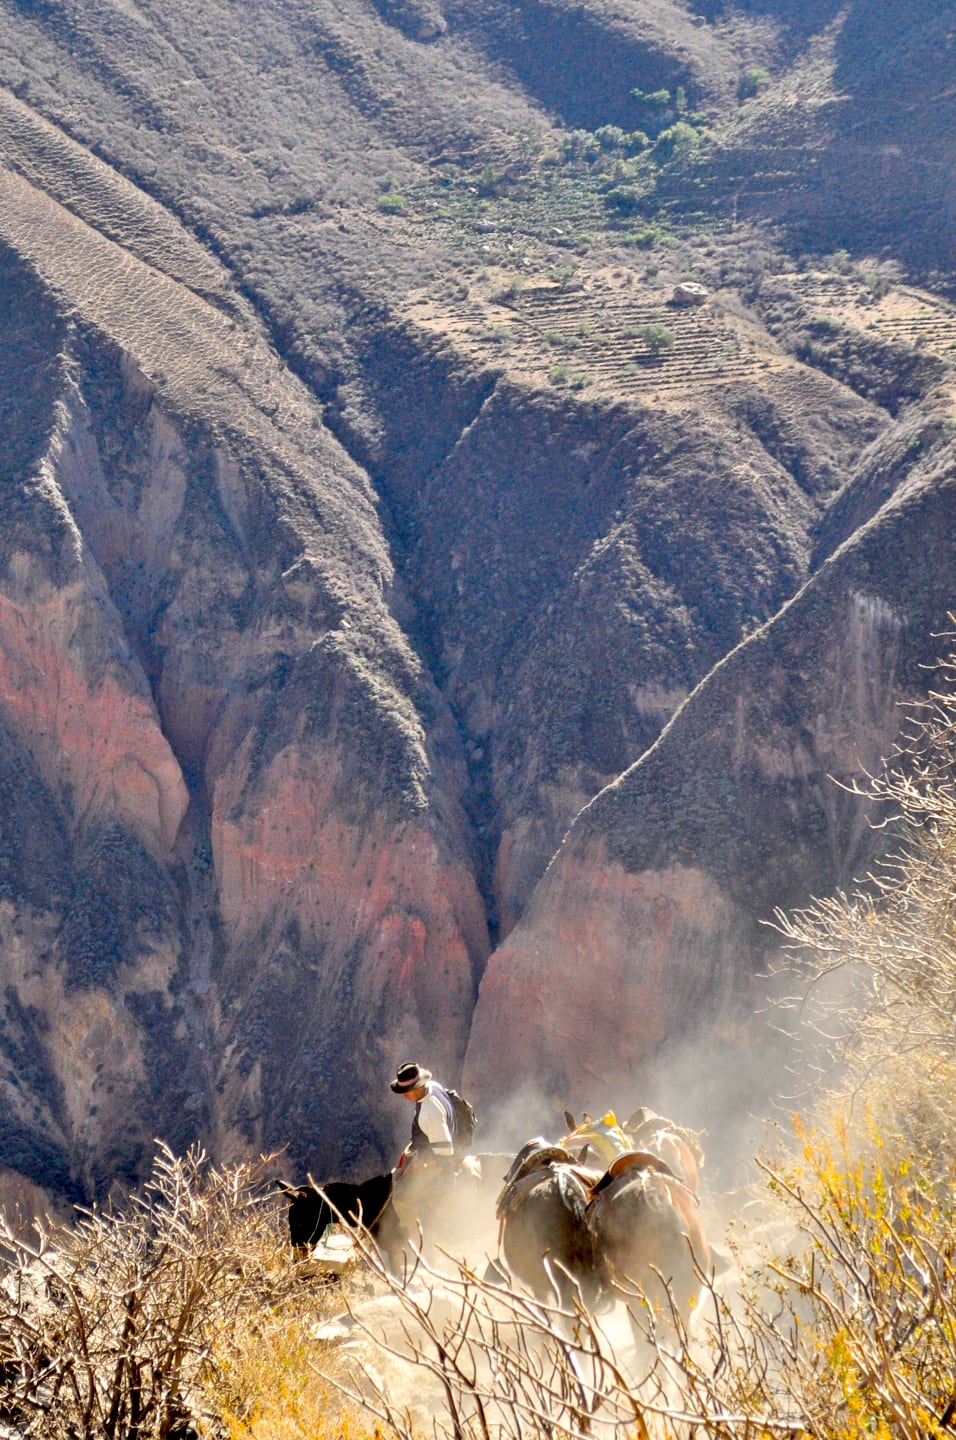 man riding a mule down the steep sides of a canyon in Peru